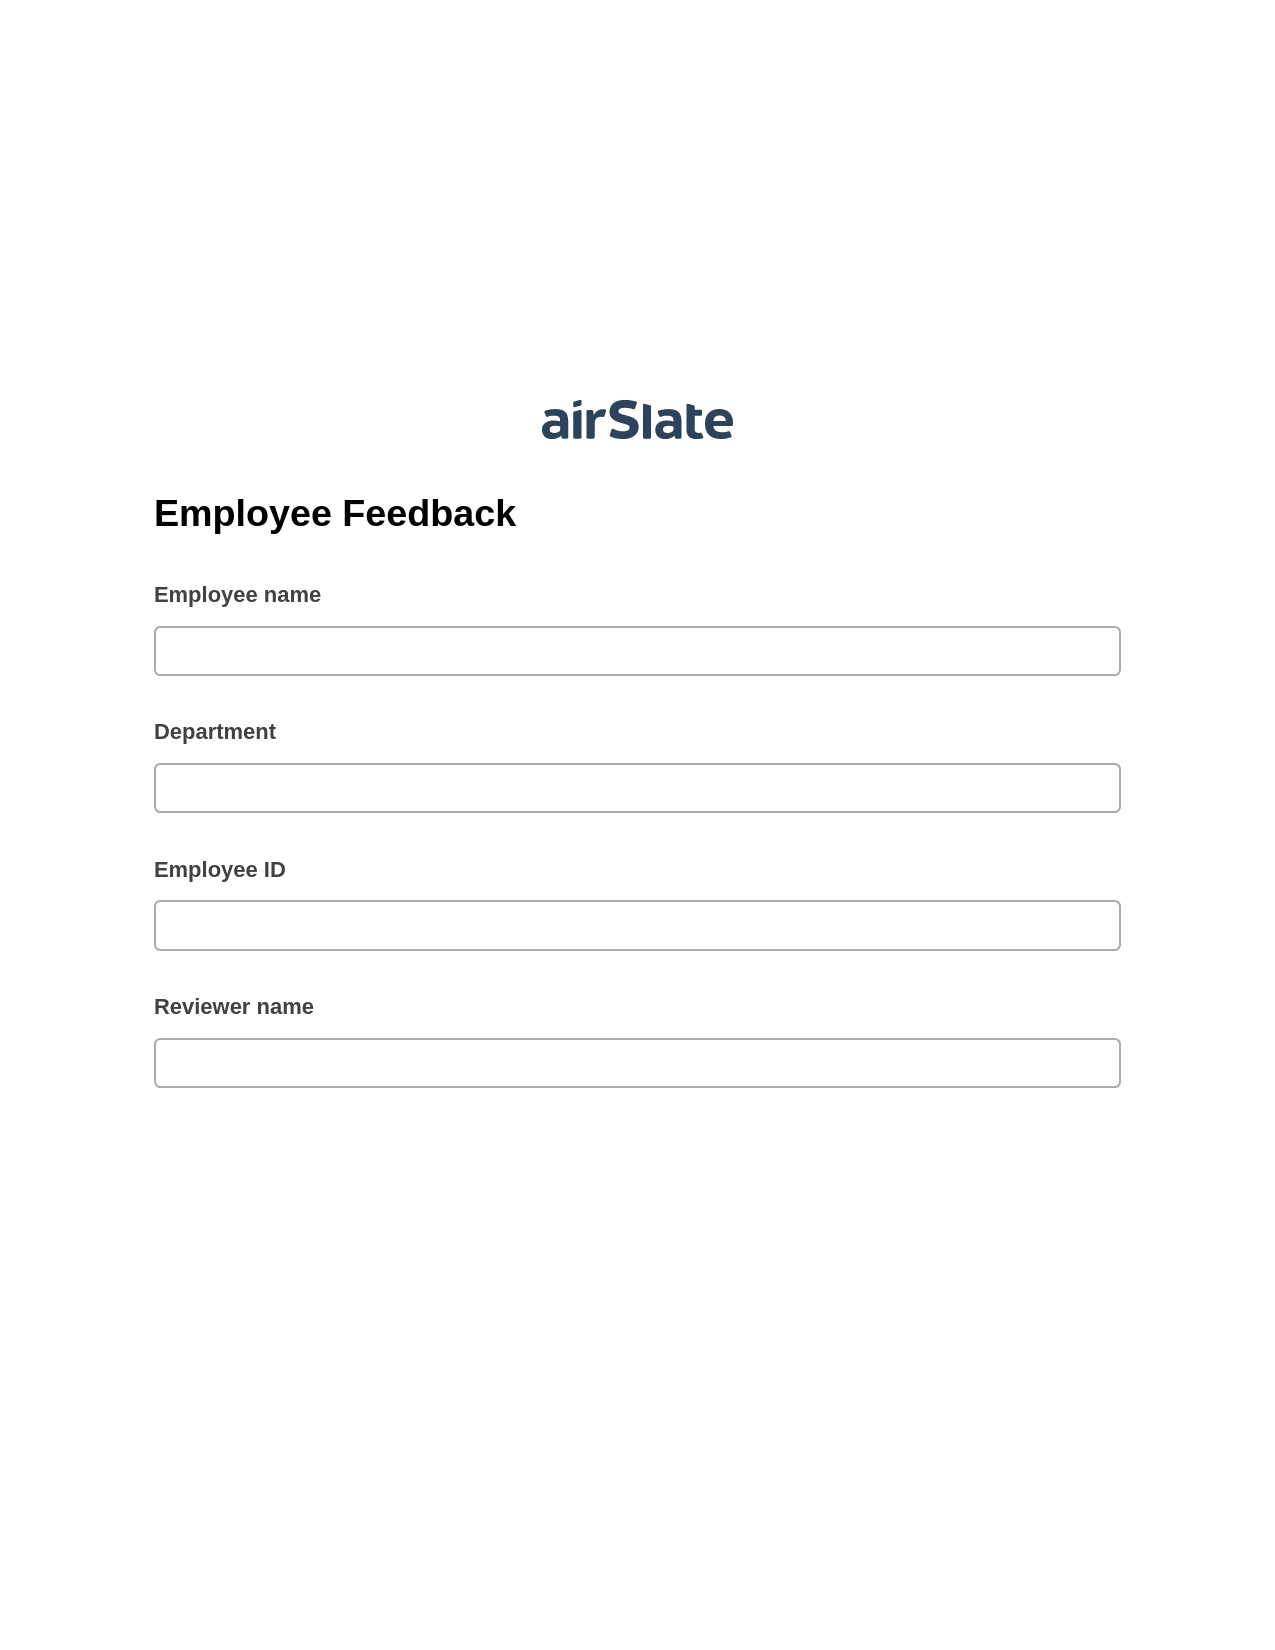 Employee Feedback Pre-fill from CSV File Bot, Slack Notification Bot, Export to Formstack Documents Bot